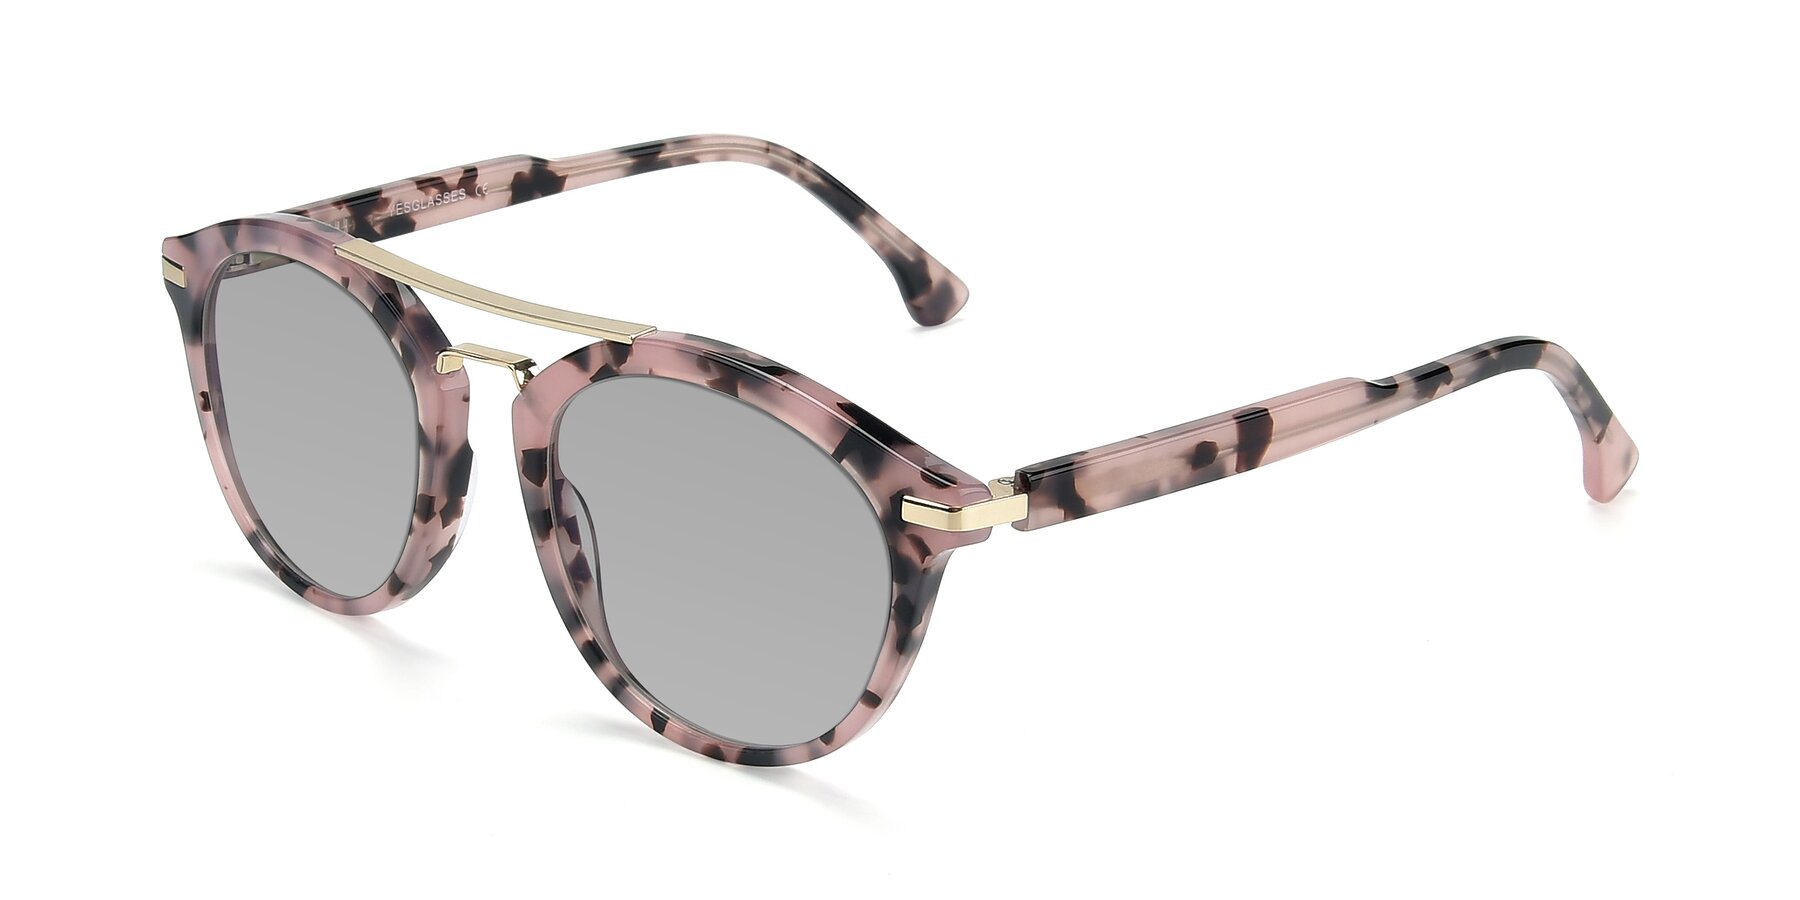 Angle of 17236 in Havana Floral-Gold with Light Gray Tinted Lenses